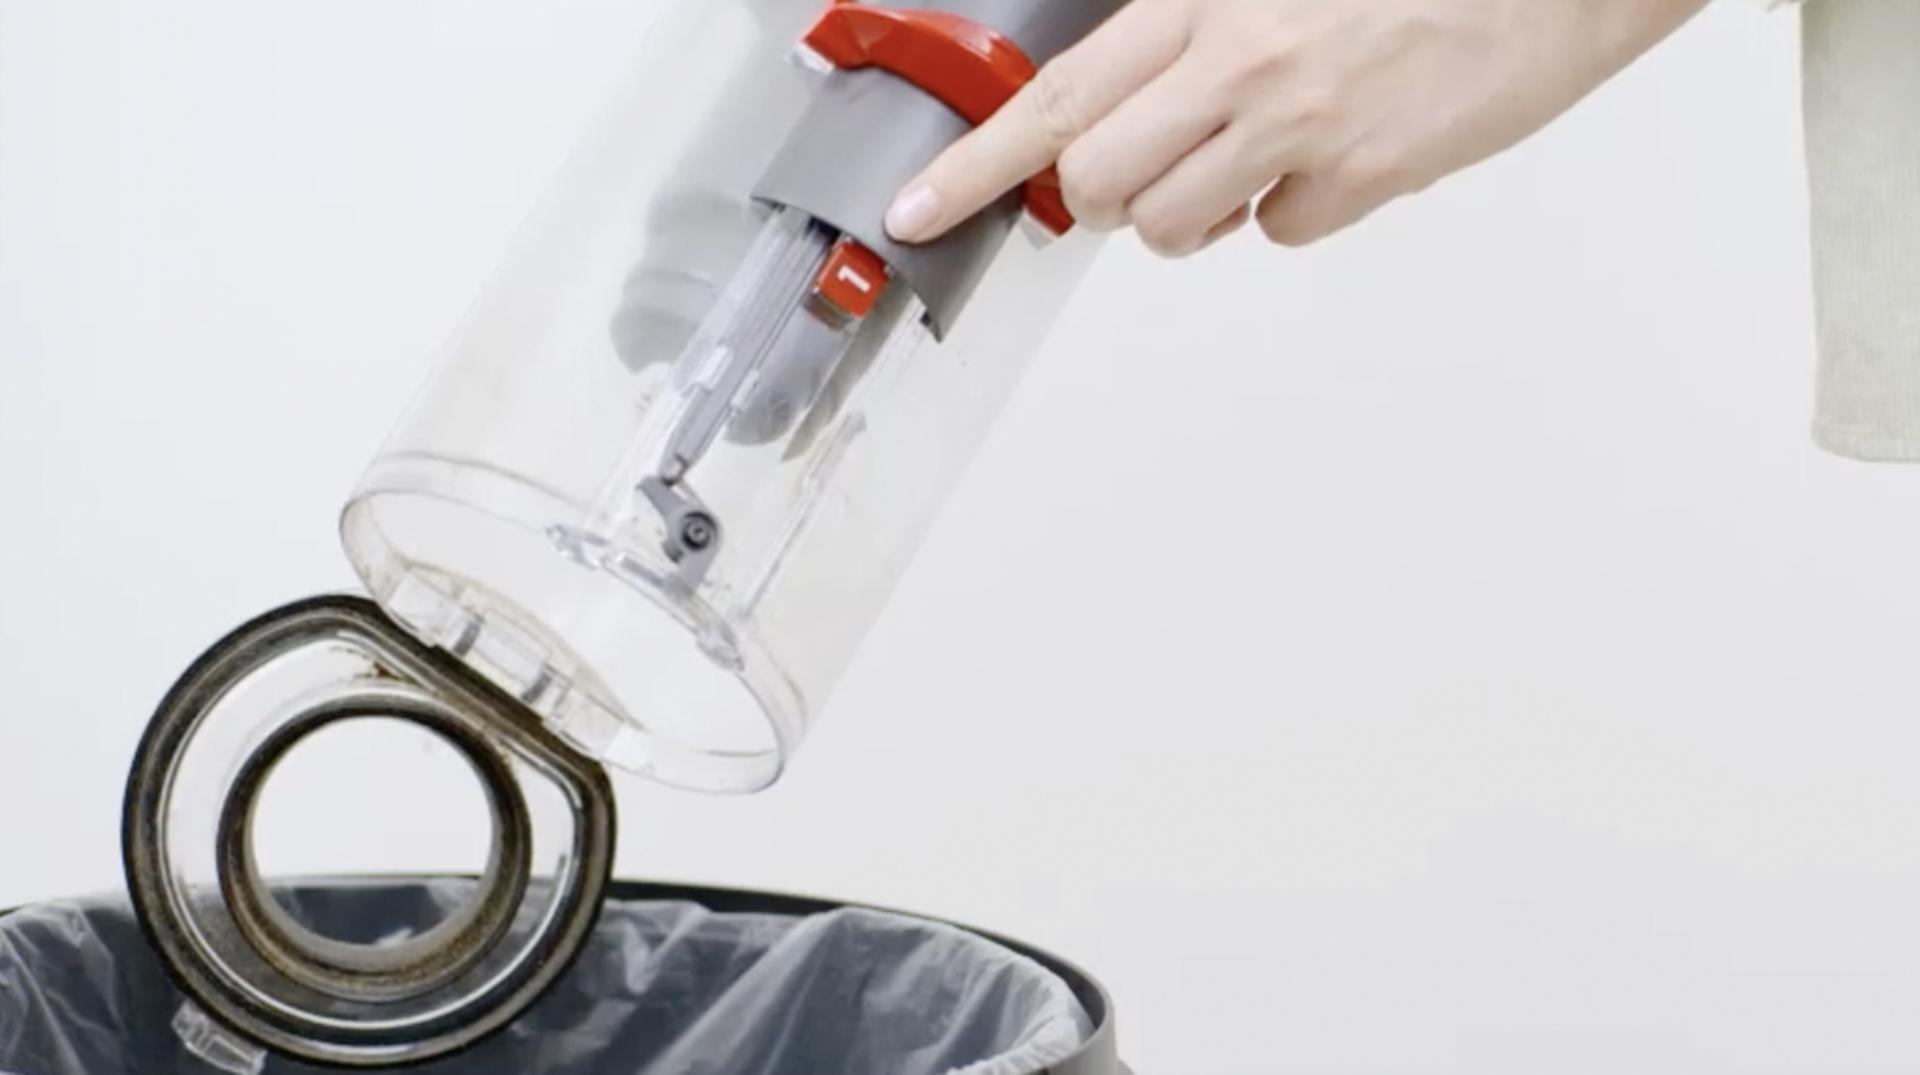 Hands cleaning out a transparent Dyson vacuum bin.